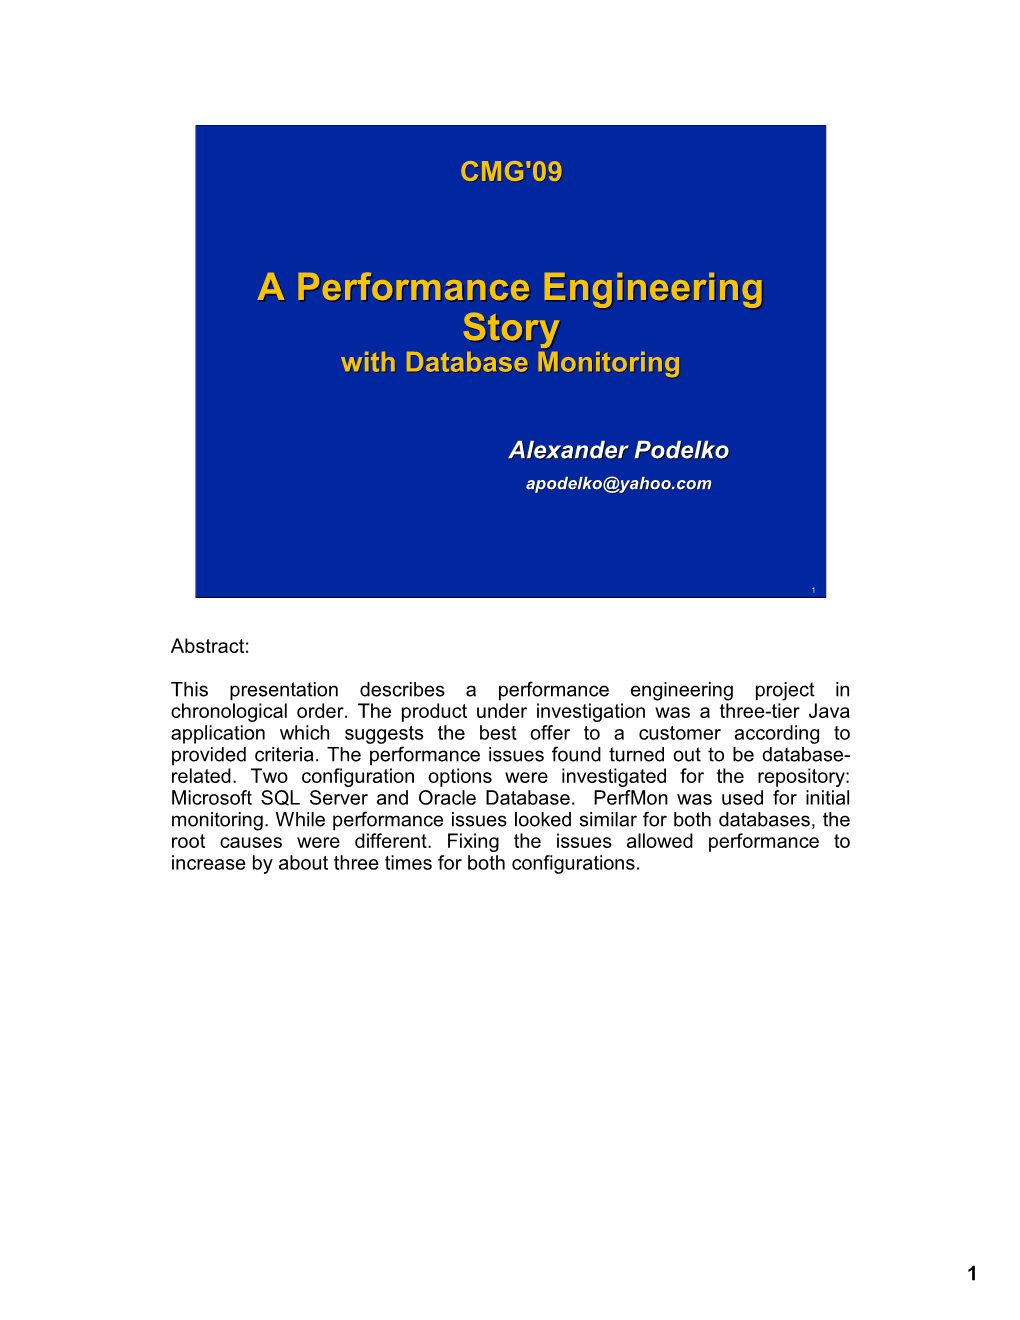 A Performance Engineering Story with Database Monitoring